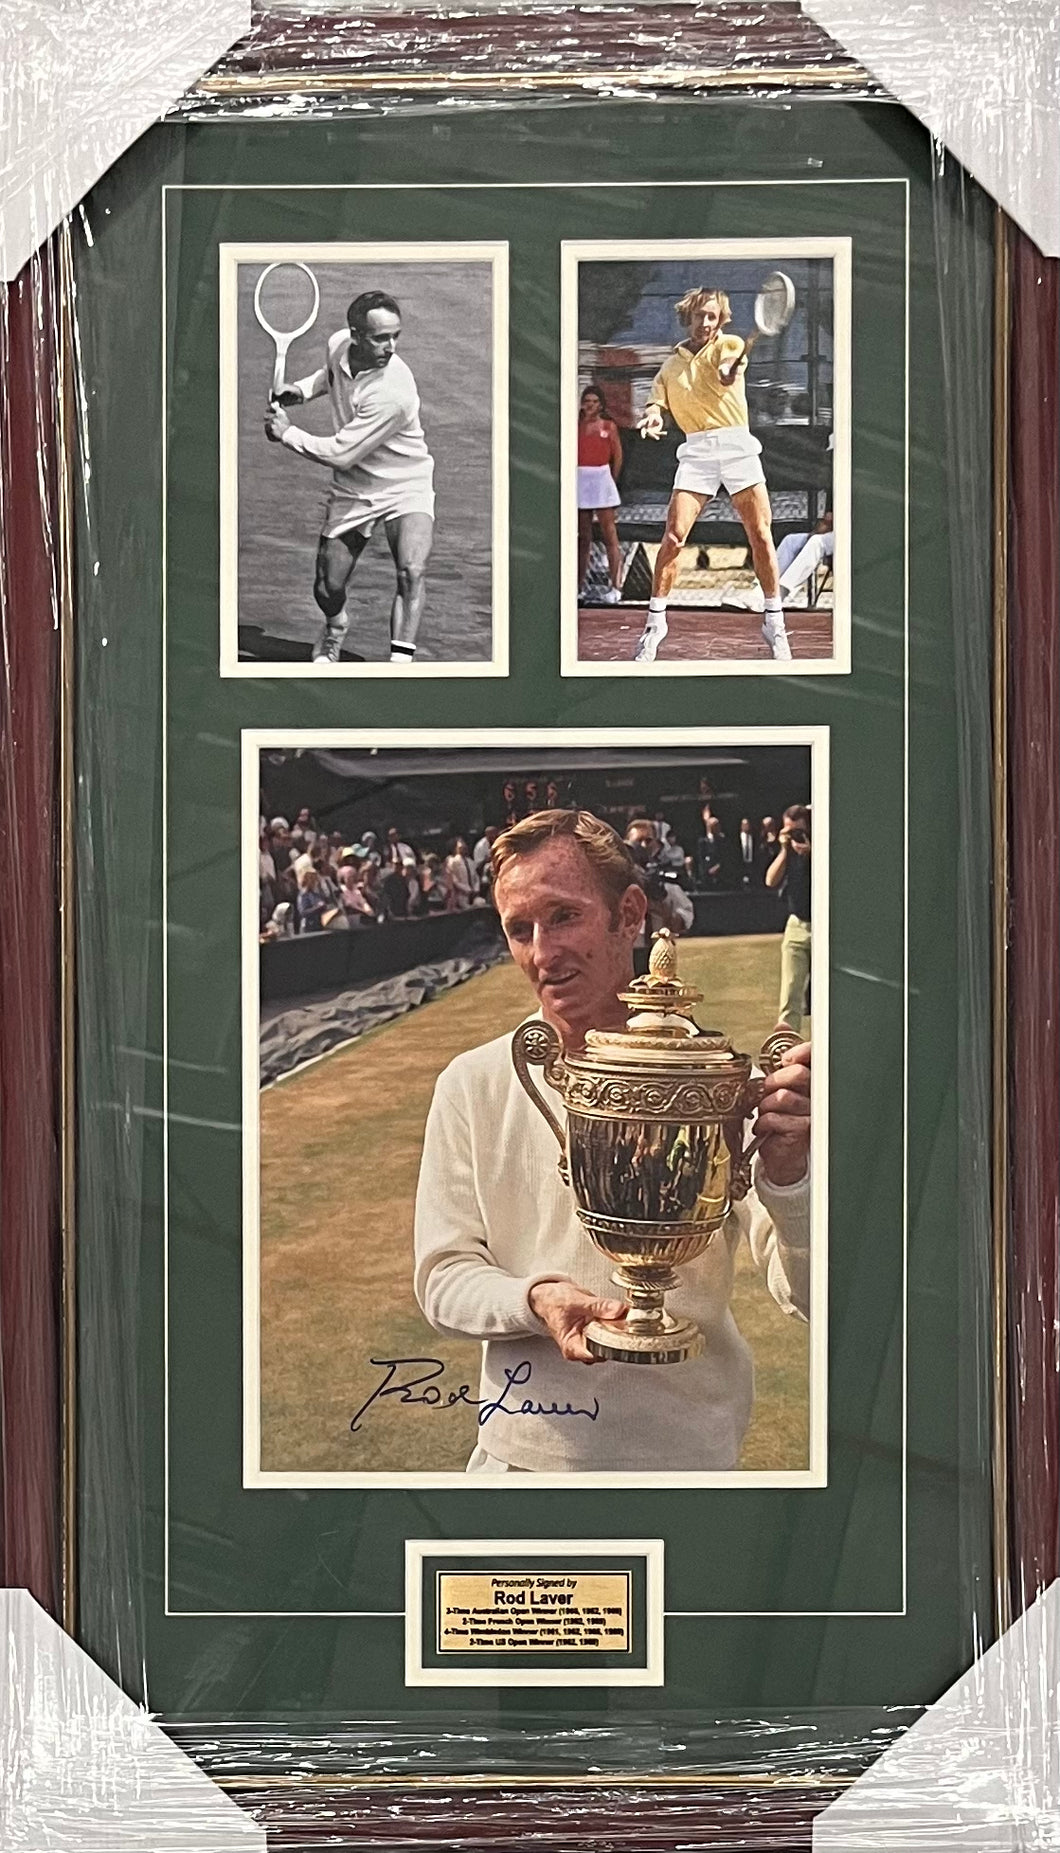 ROD LAVER Signed Photo Collage Display